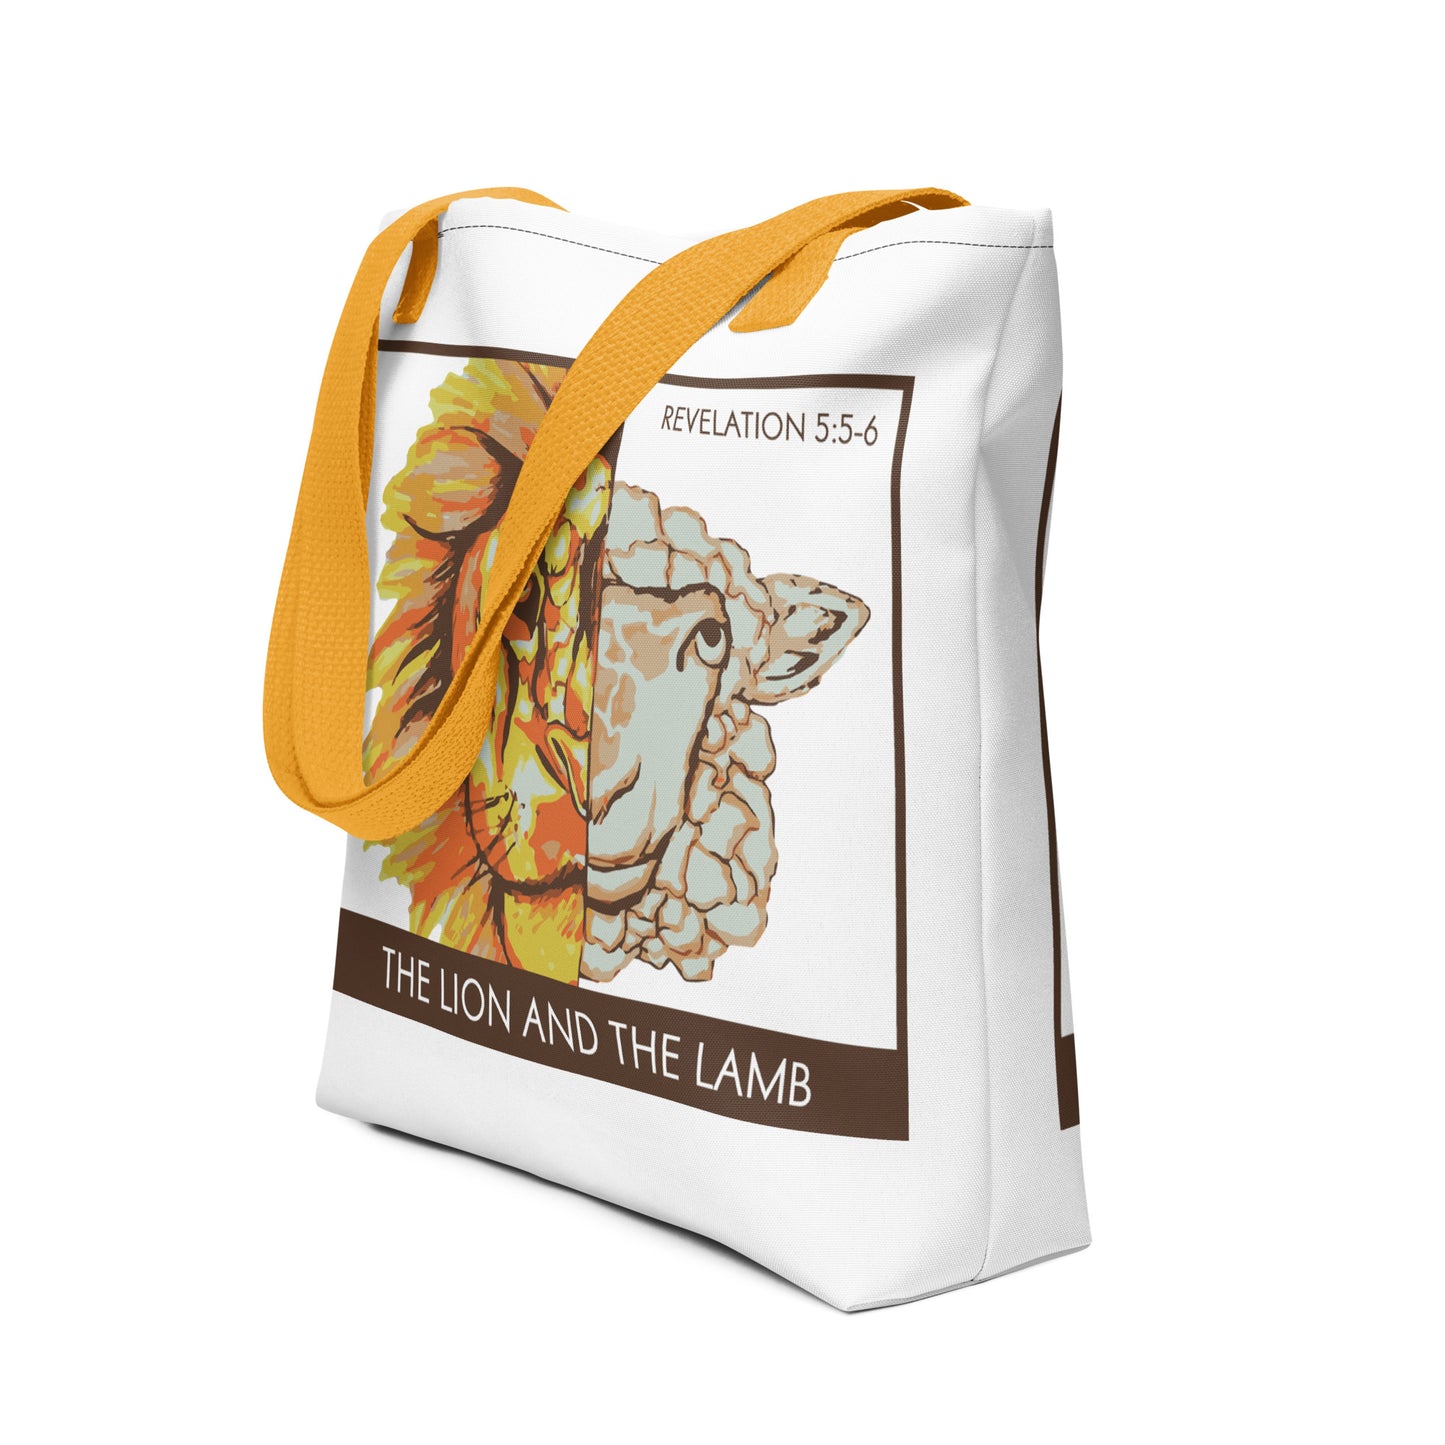 The Lion and the Lamb Tote bag